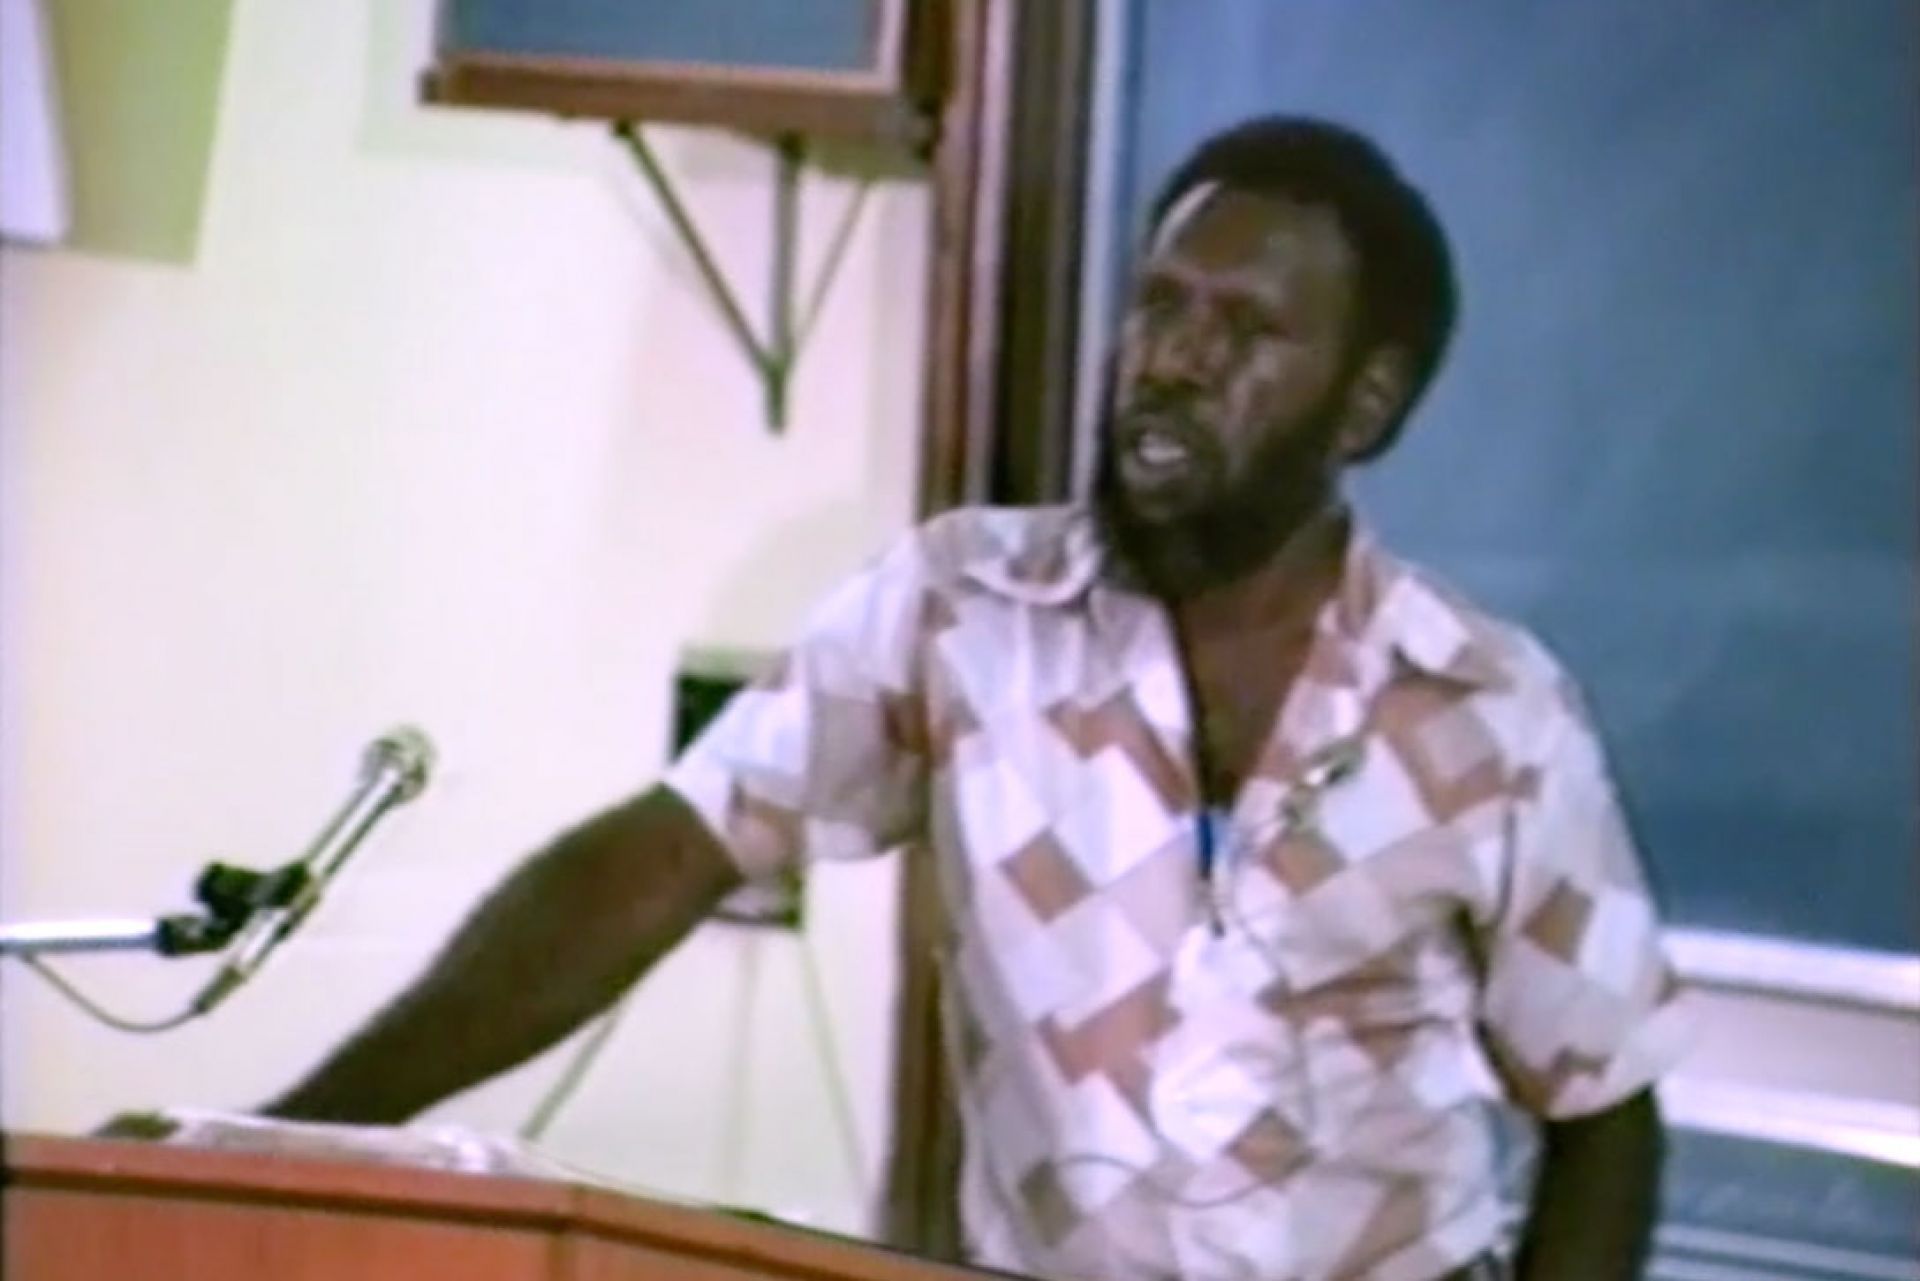 Koiki Mabo stands at a lectern, talking